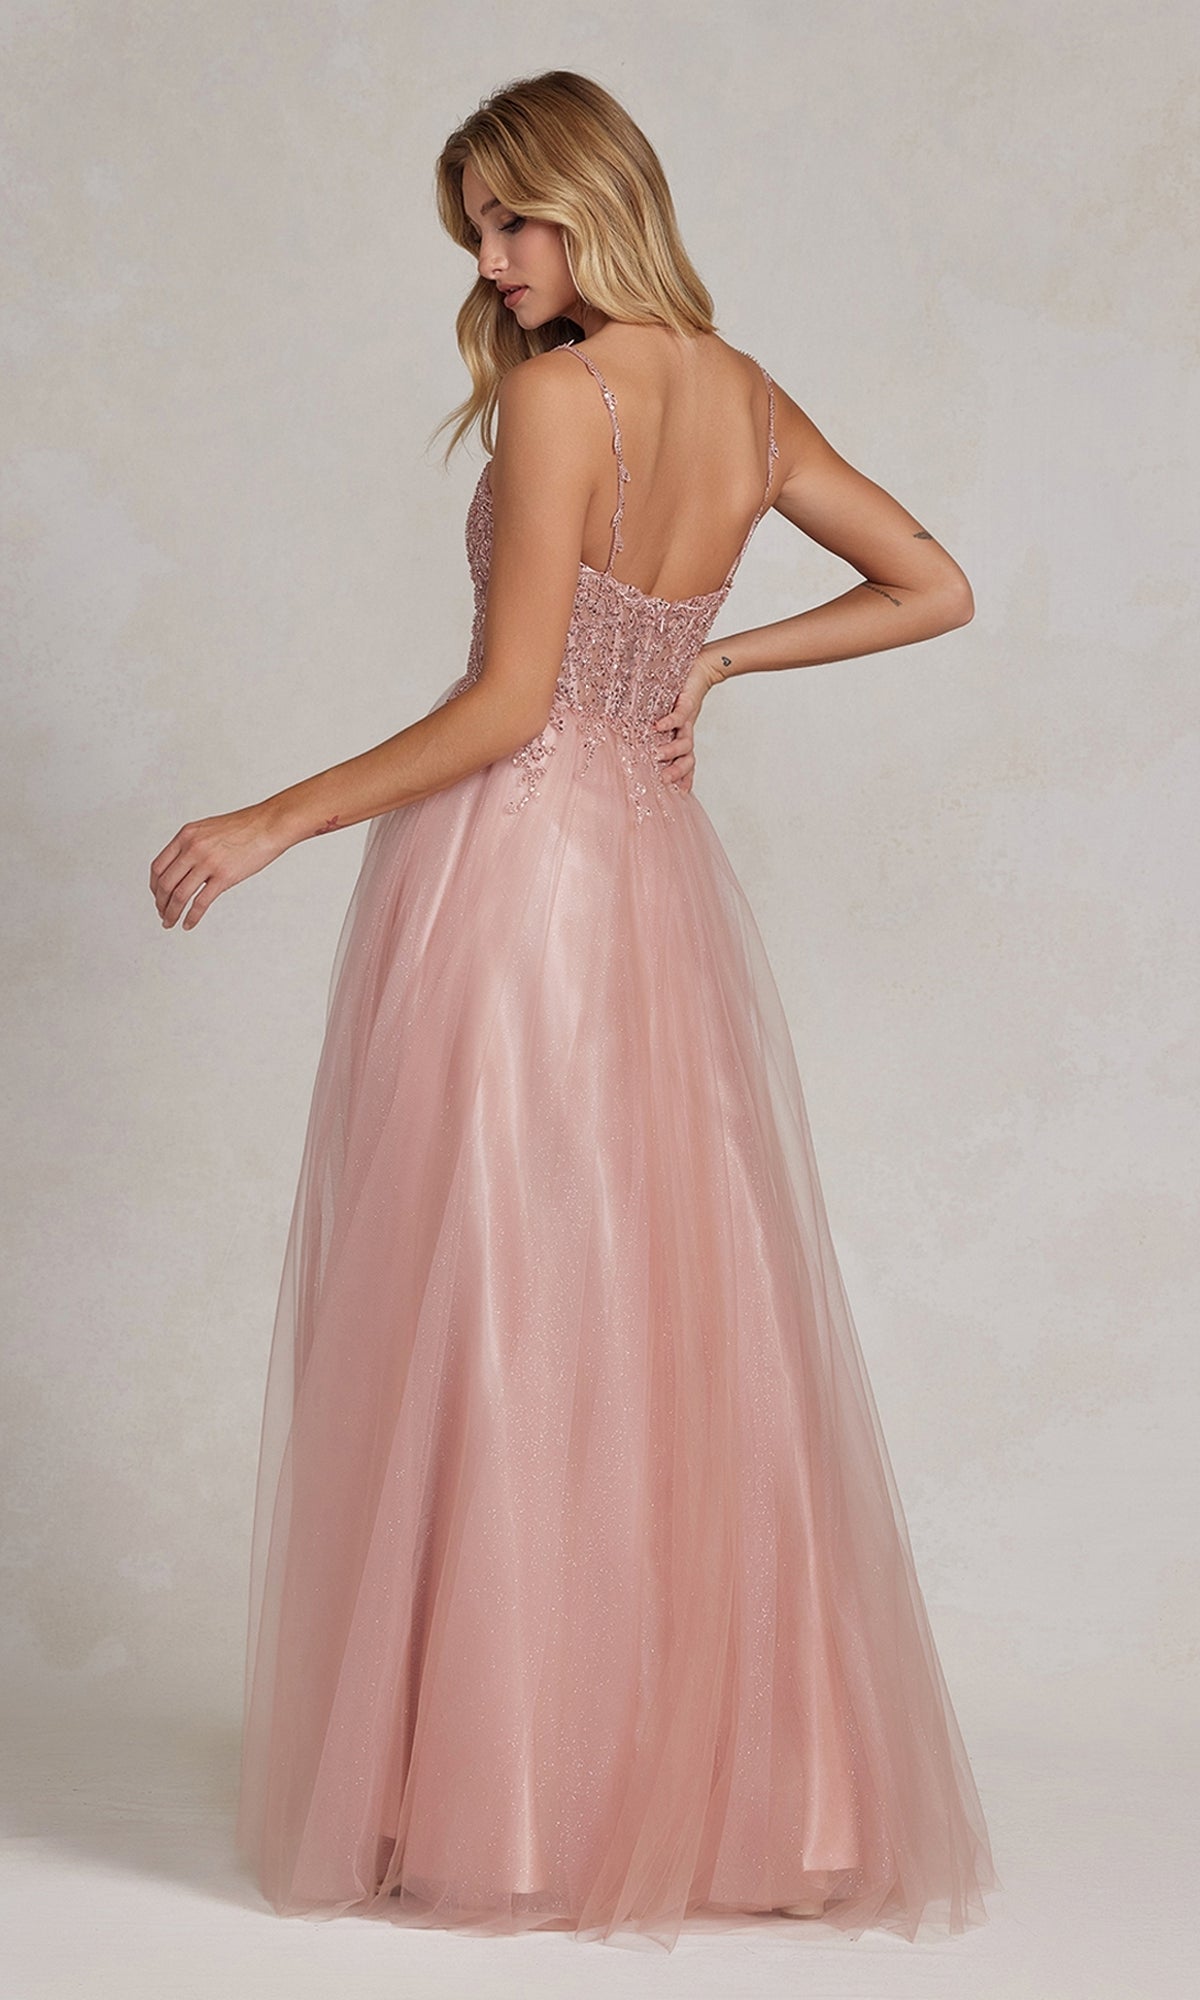  Beaded-Bodice Rose Gold Long Prom Ball Gown